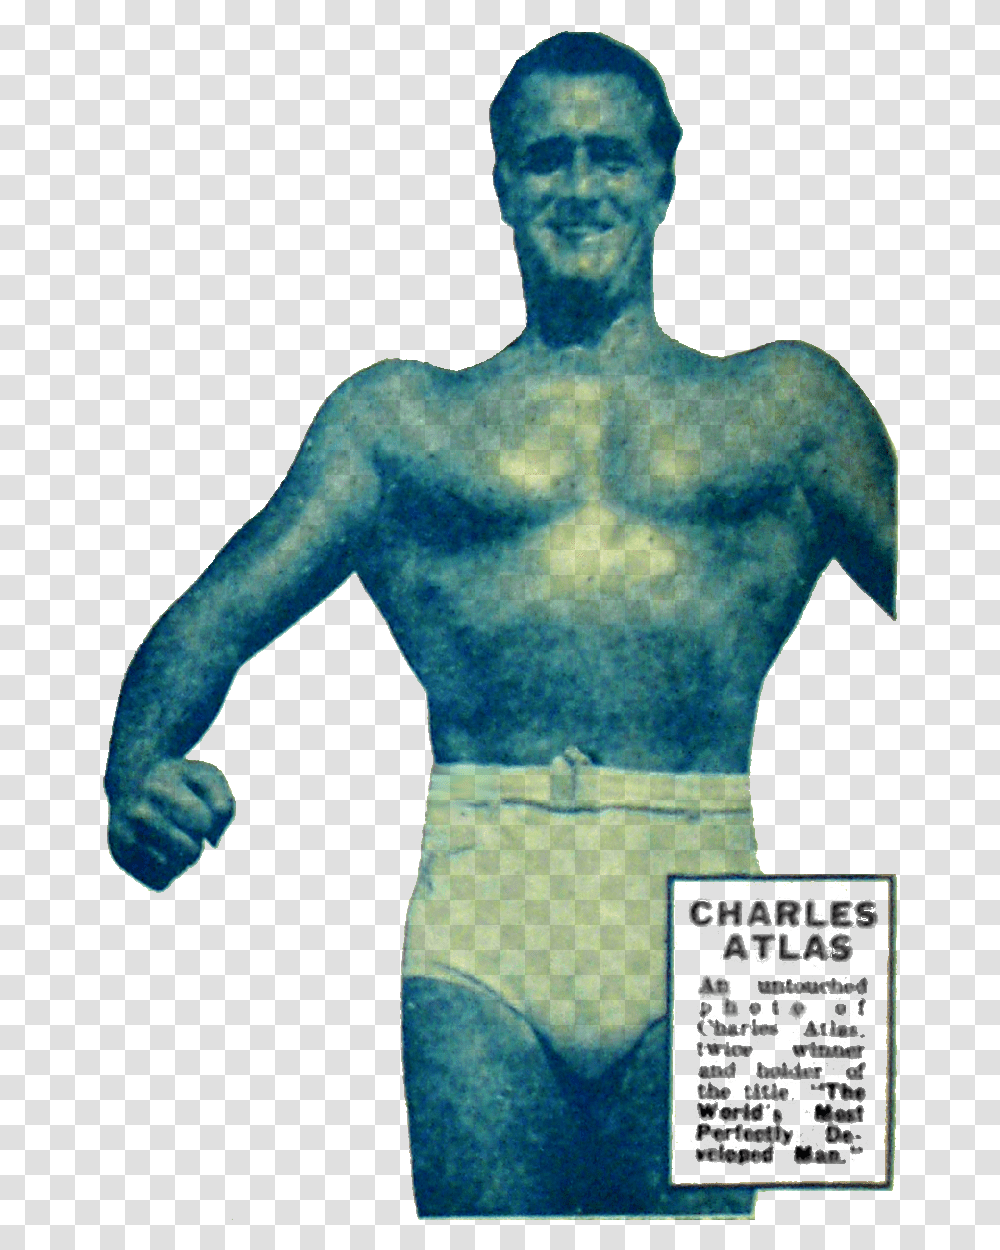 Charles Atlas An Untouched Photo Of Charles Atlas Charles Atlas, Alien, Person, Green Transparent Png